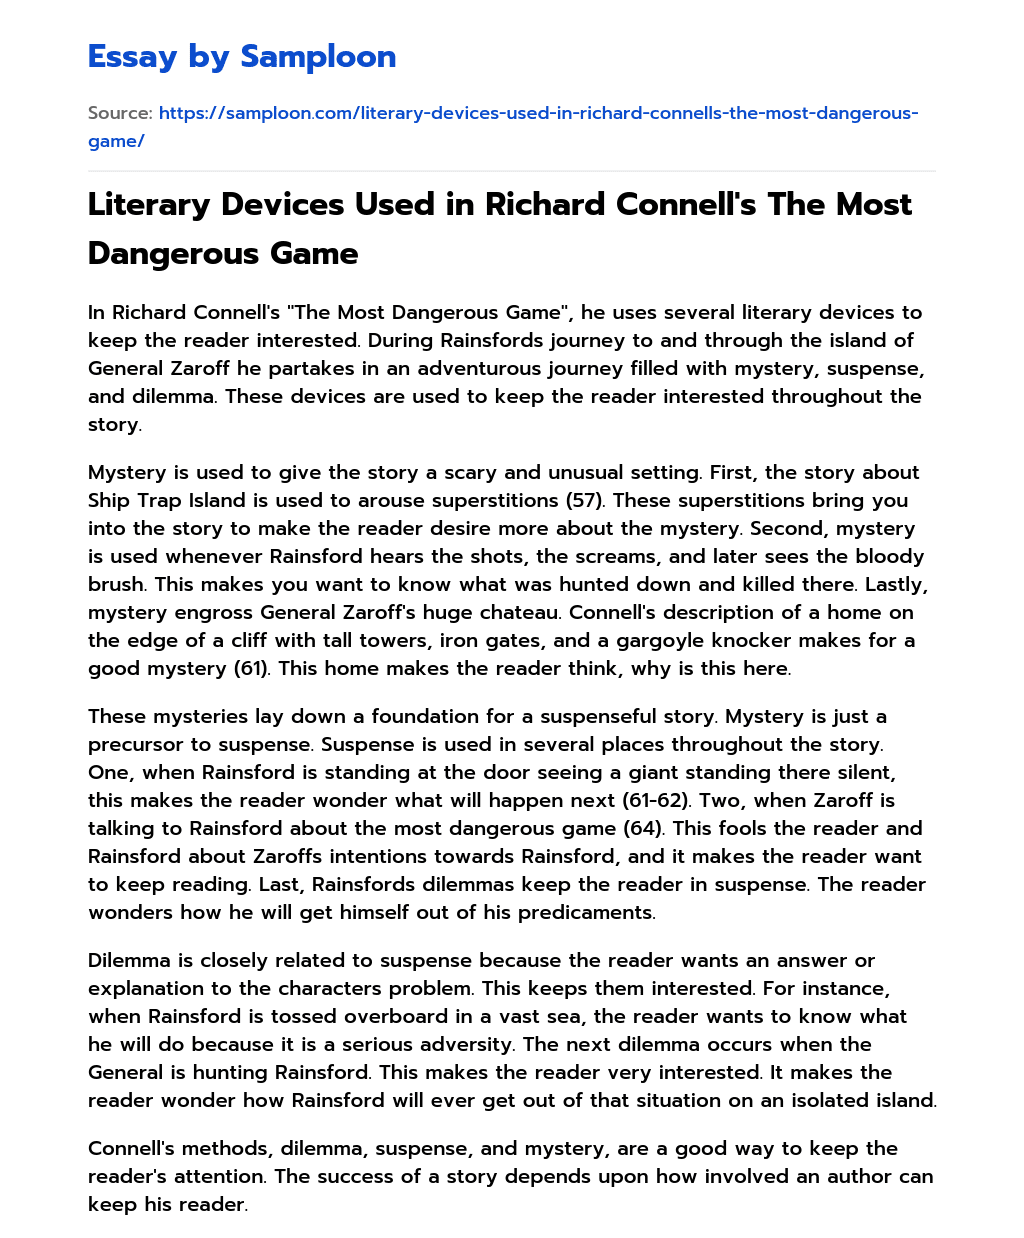 Literary Devices Used in Richard Connell’s The Most Dangerous Game essay